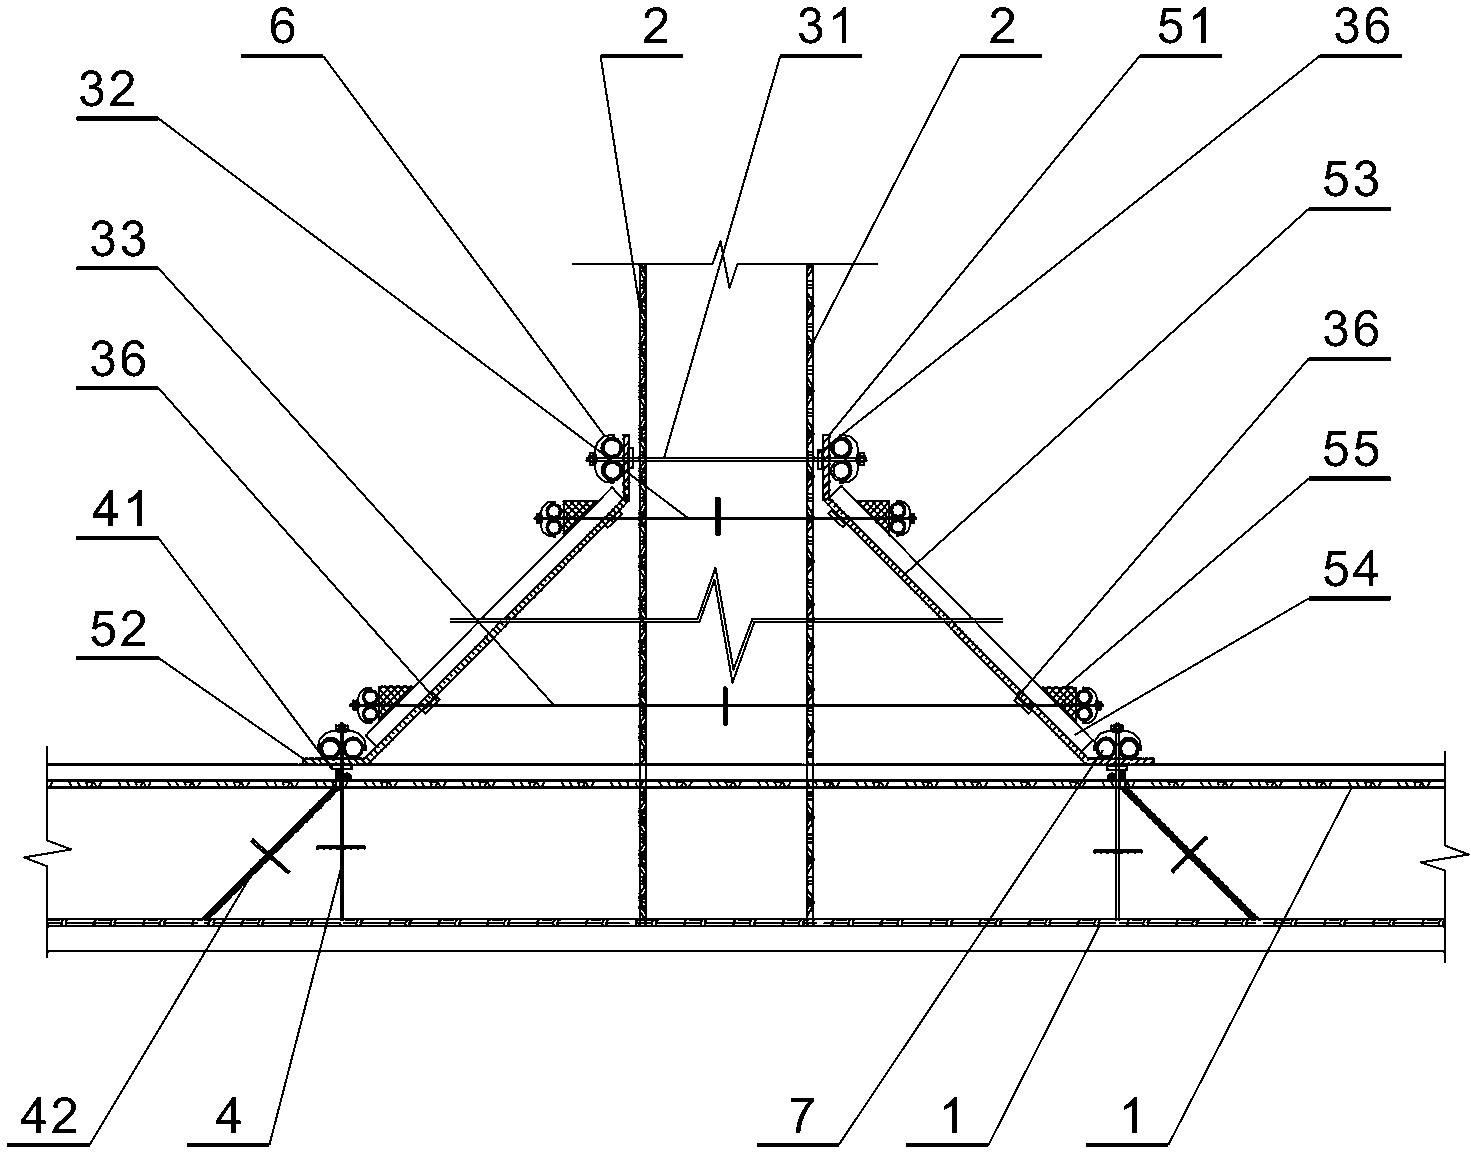 Mould supporting method for trapezoid cross section base of shear wall